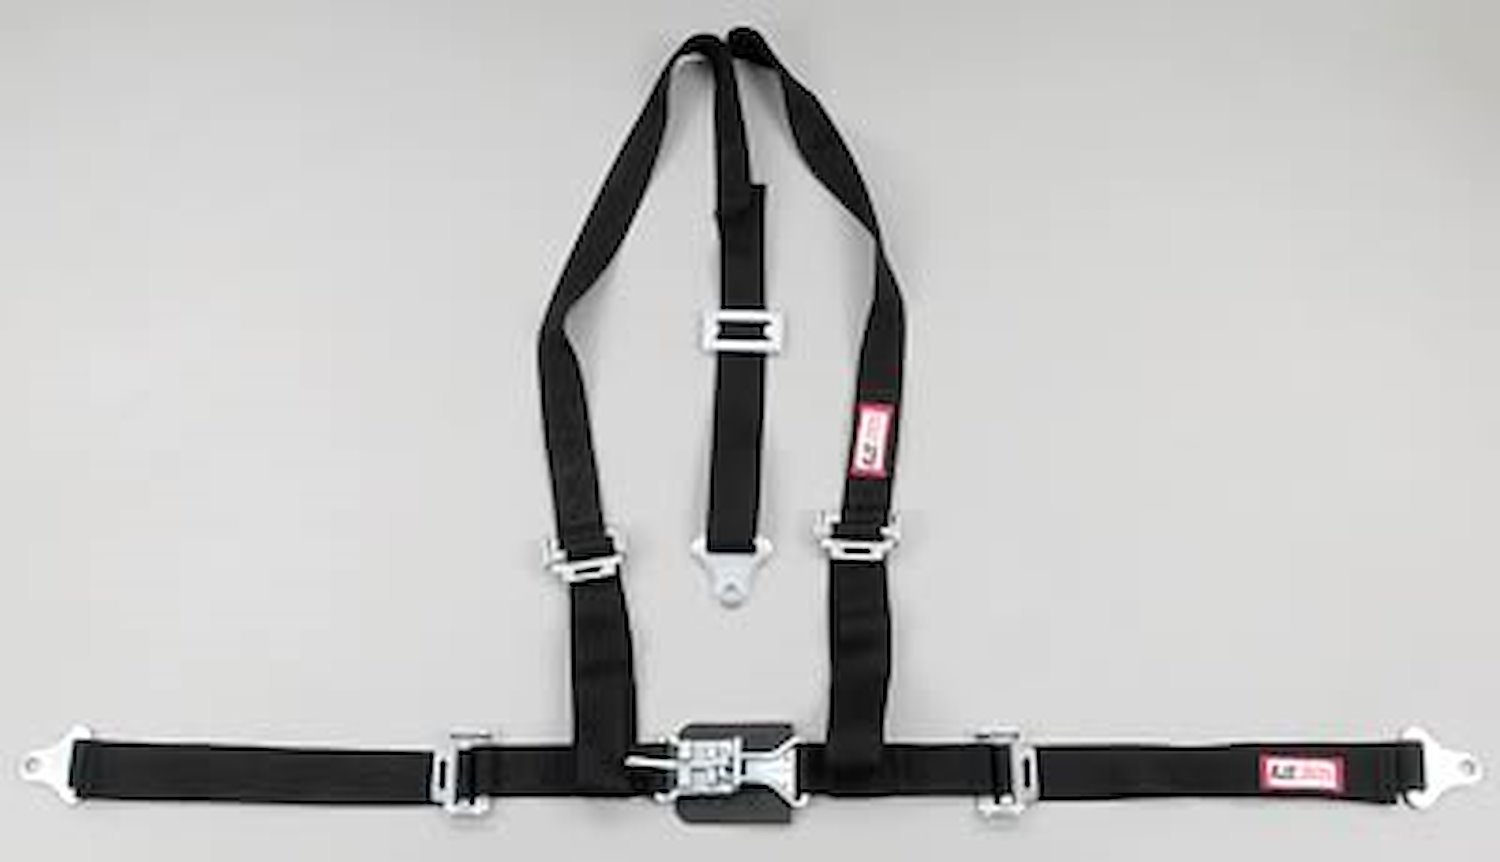 NON-SFI L&L HARNESS 3 PULL DOWN Lap Belt BOLT SEWN IN 2 S.H. Individual FLOOR Mount w/STERNUM STRAP WRAP/BOLT RED